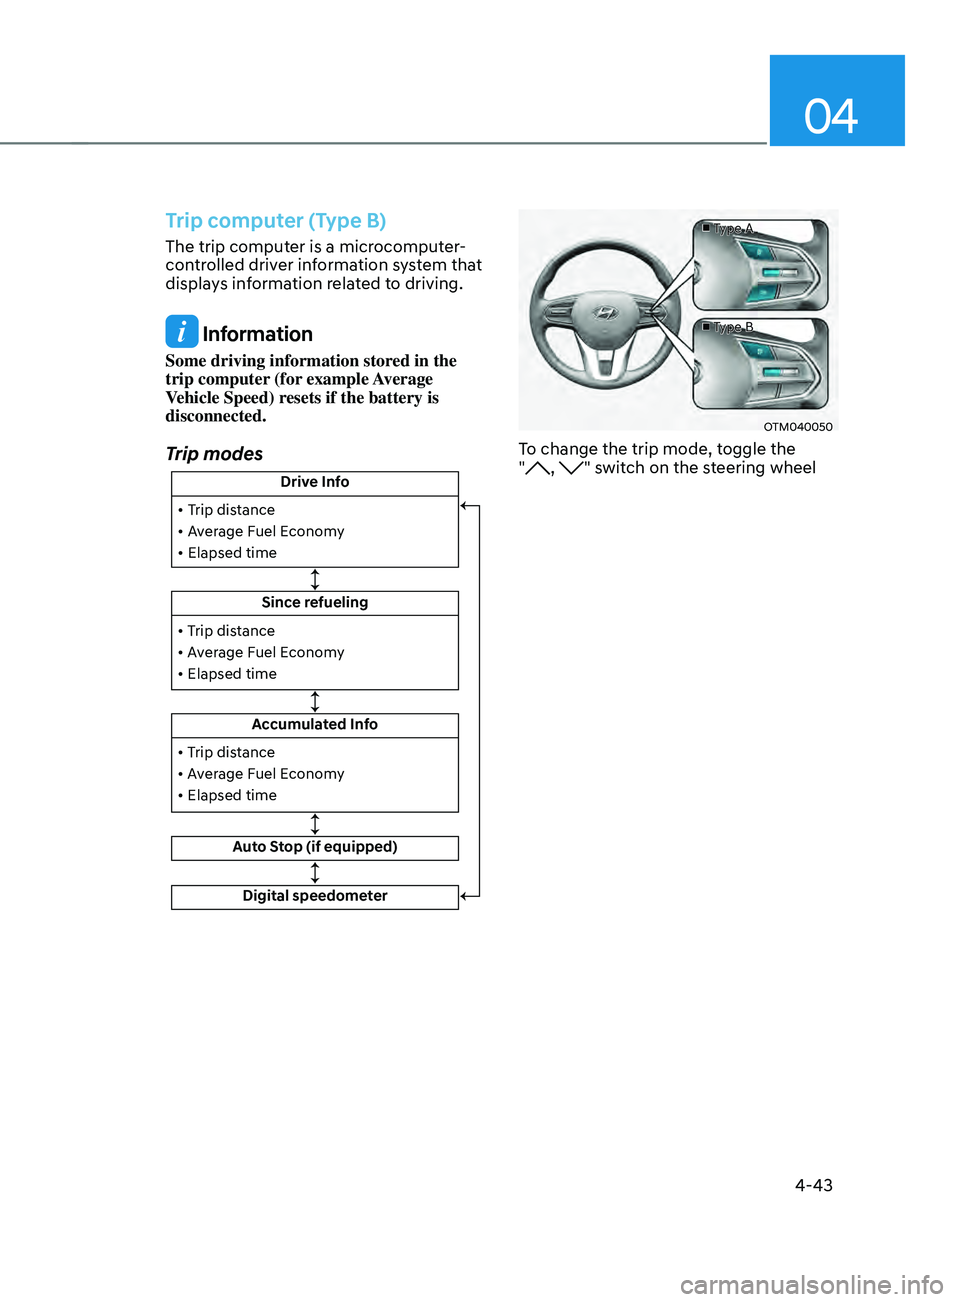 HYUNDAI SANTA FE 2021  Owners Manual 04
4-43
Trip computer (Type B)
The trip computer is a microcomputer-
controlled driver information system that 
displays information related to driving.
 Information
Some driving information stored in